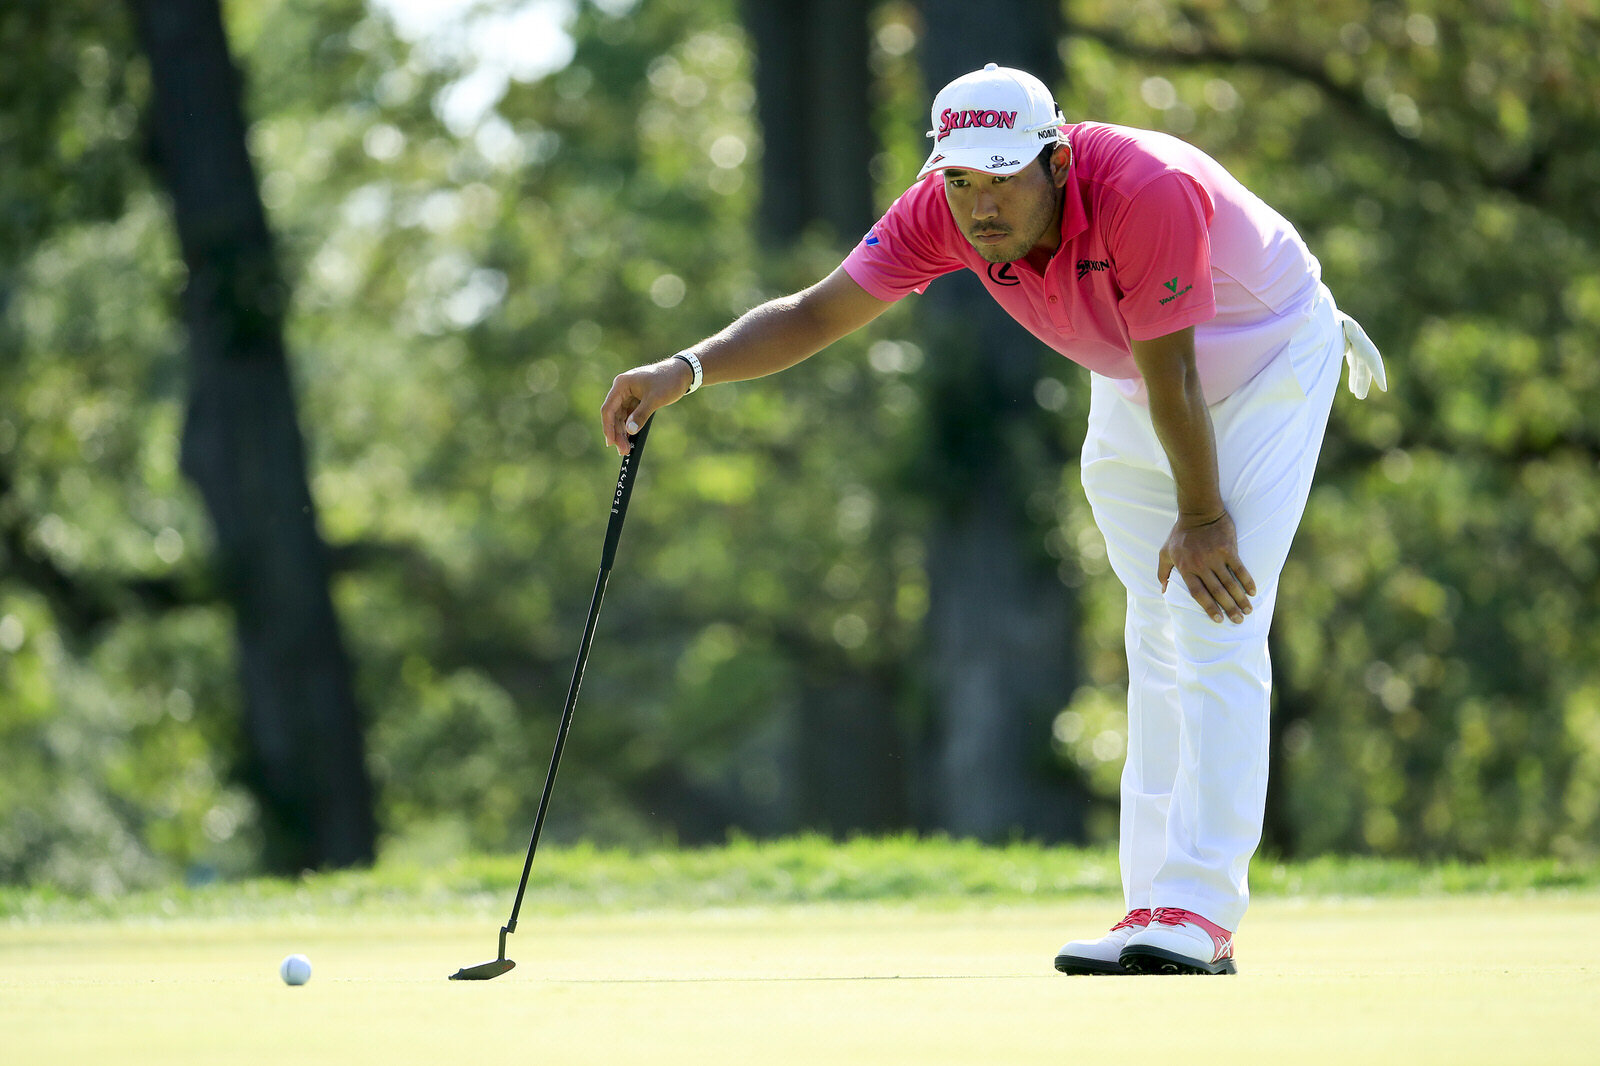  OLYMPIA FIELDS, ILLINOIS - AUGUST 28: Hideki Matsuyama of Japan lines up a putt for par on the 17th green during the second round of the BMW Championship on the North Course at Olympia Fields Country Club on August 28, 2020 in Olympia Fields, Illino